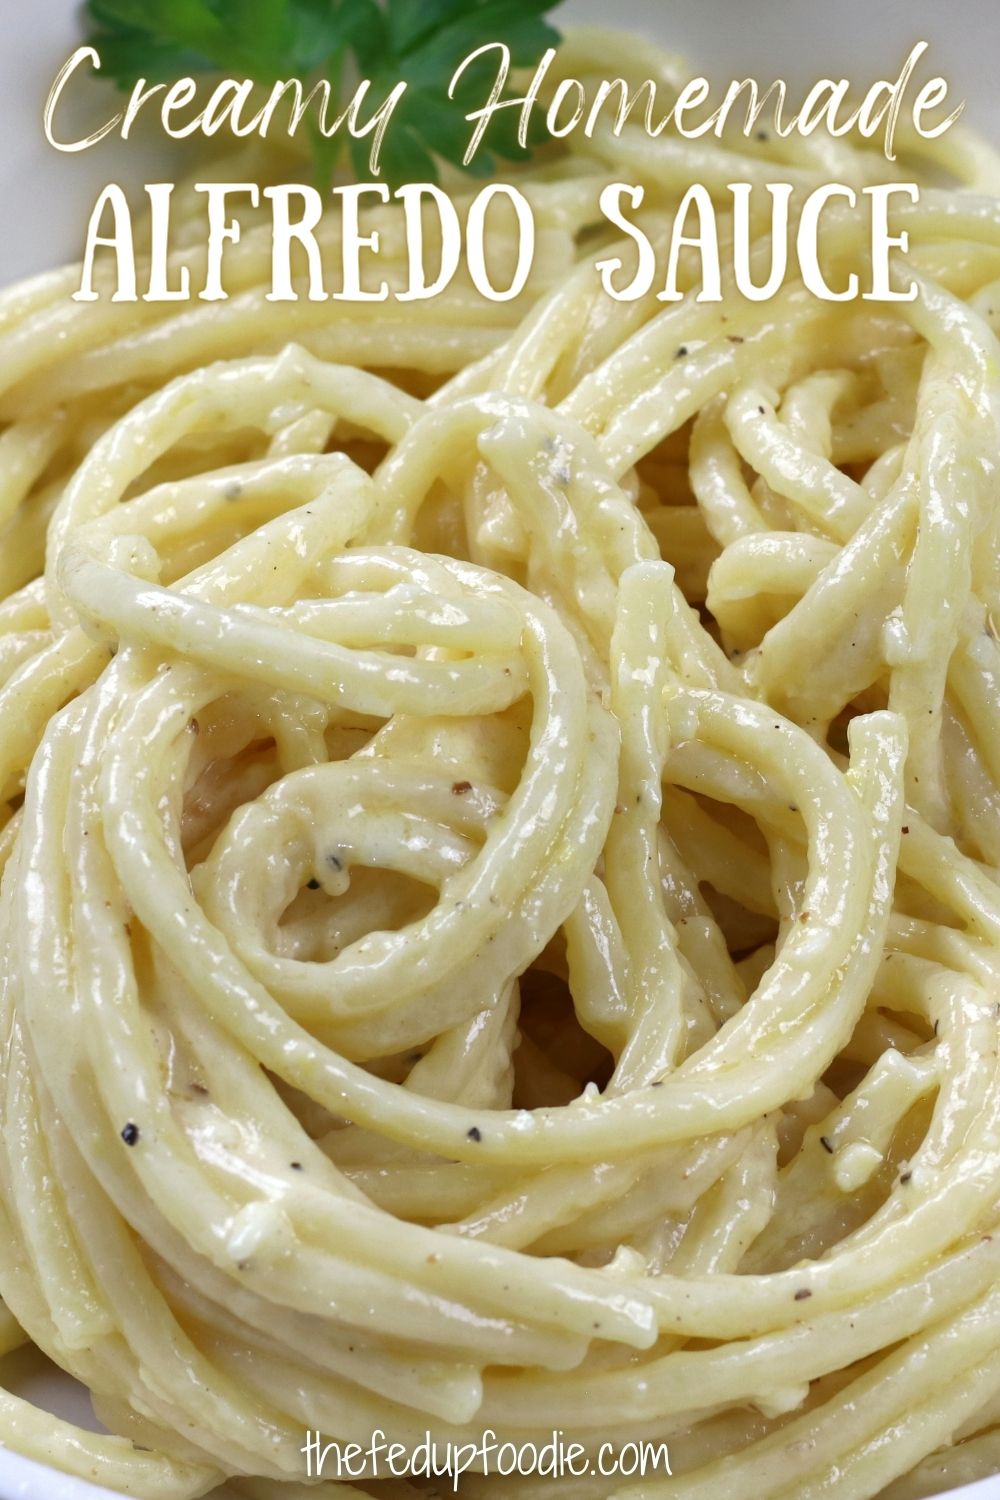 Creamy homemade Alfredo Sauce is flavorful and very easy to make. With hints of garlic, nutmeg and lemon, this from-scratch sauce is a simple recipe that has big impact.  Elegant enough for romantic dinners or when hosting a dinner party and yet easy enough for cozy nights on the couch. #AlfredoSauceRecipe #AlfredoSauce #AlfredoPasta #CreamyAlfredoSauceRecipe #BestAlfredoSauceRecipeHomemade #AlfredoSauceFromScratch #DIYAlfredoSauceEasy